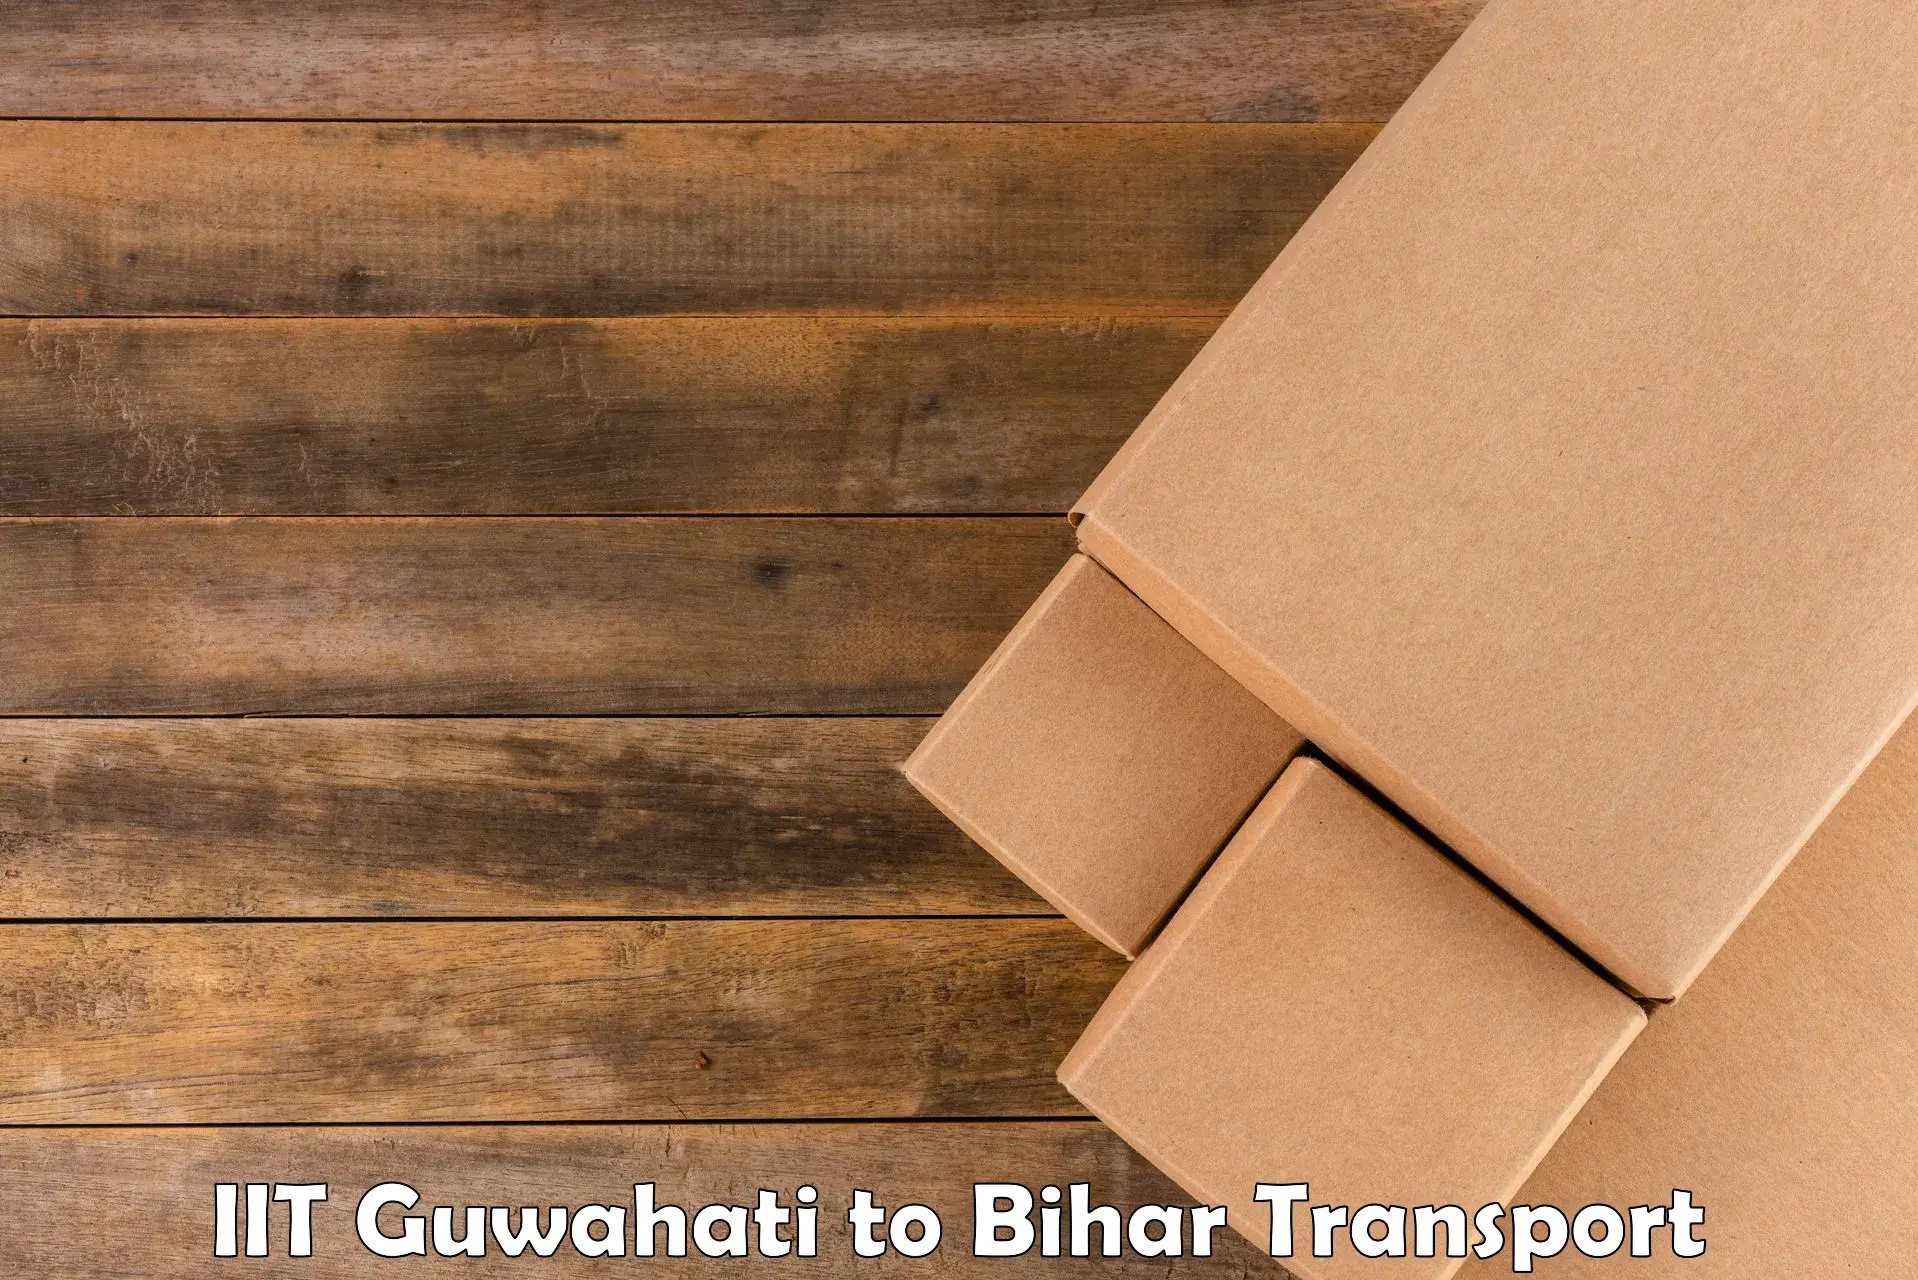 Package delivery services IIT Guwahati to Mohiuddin Nagar